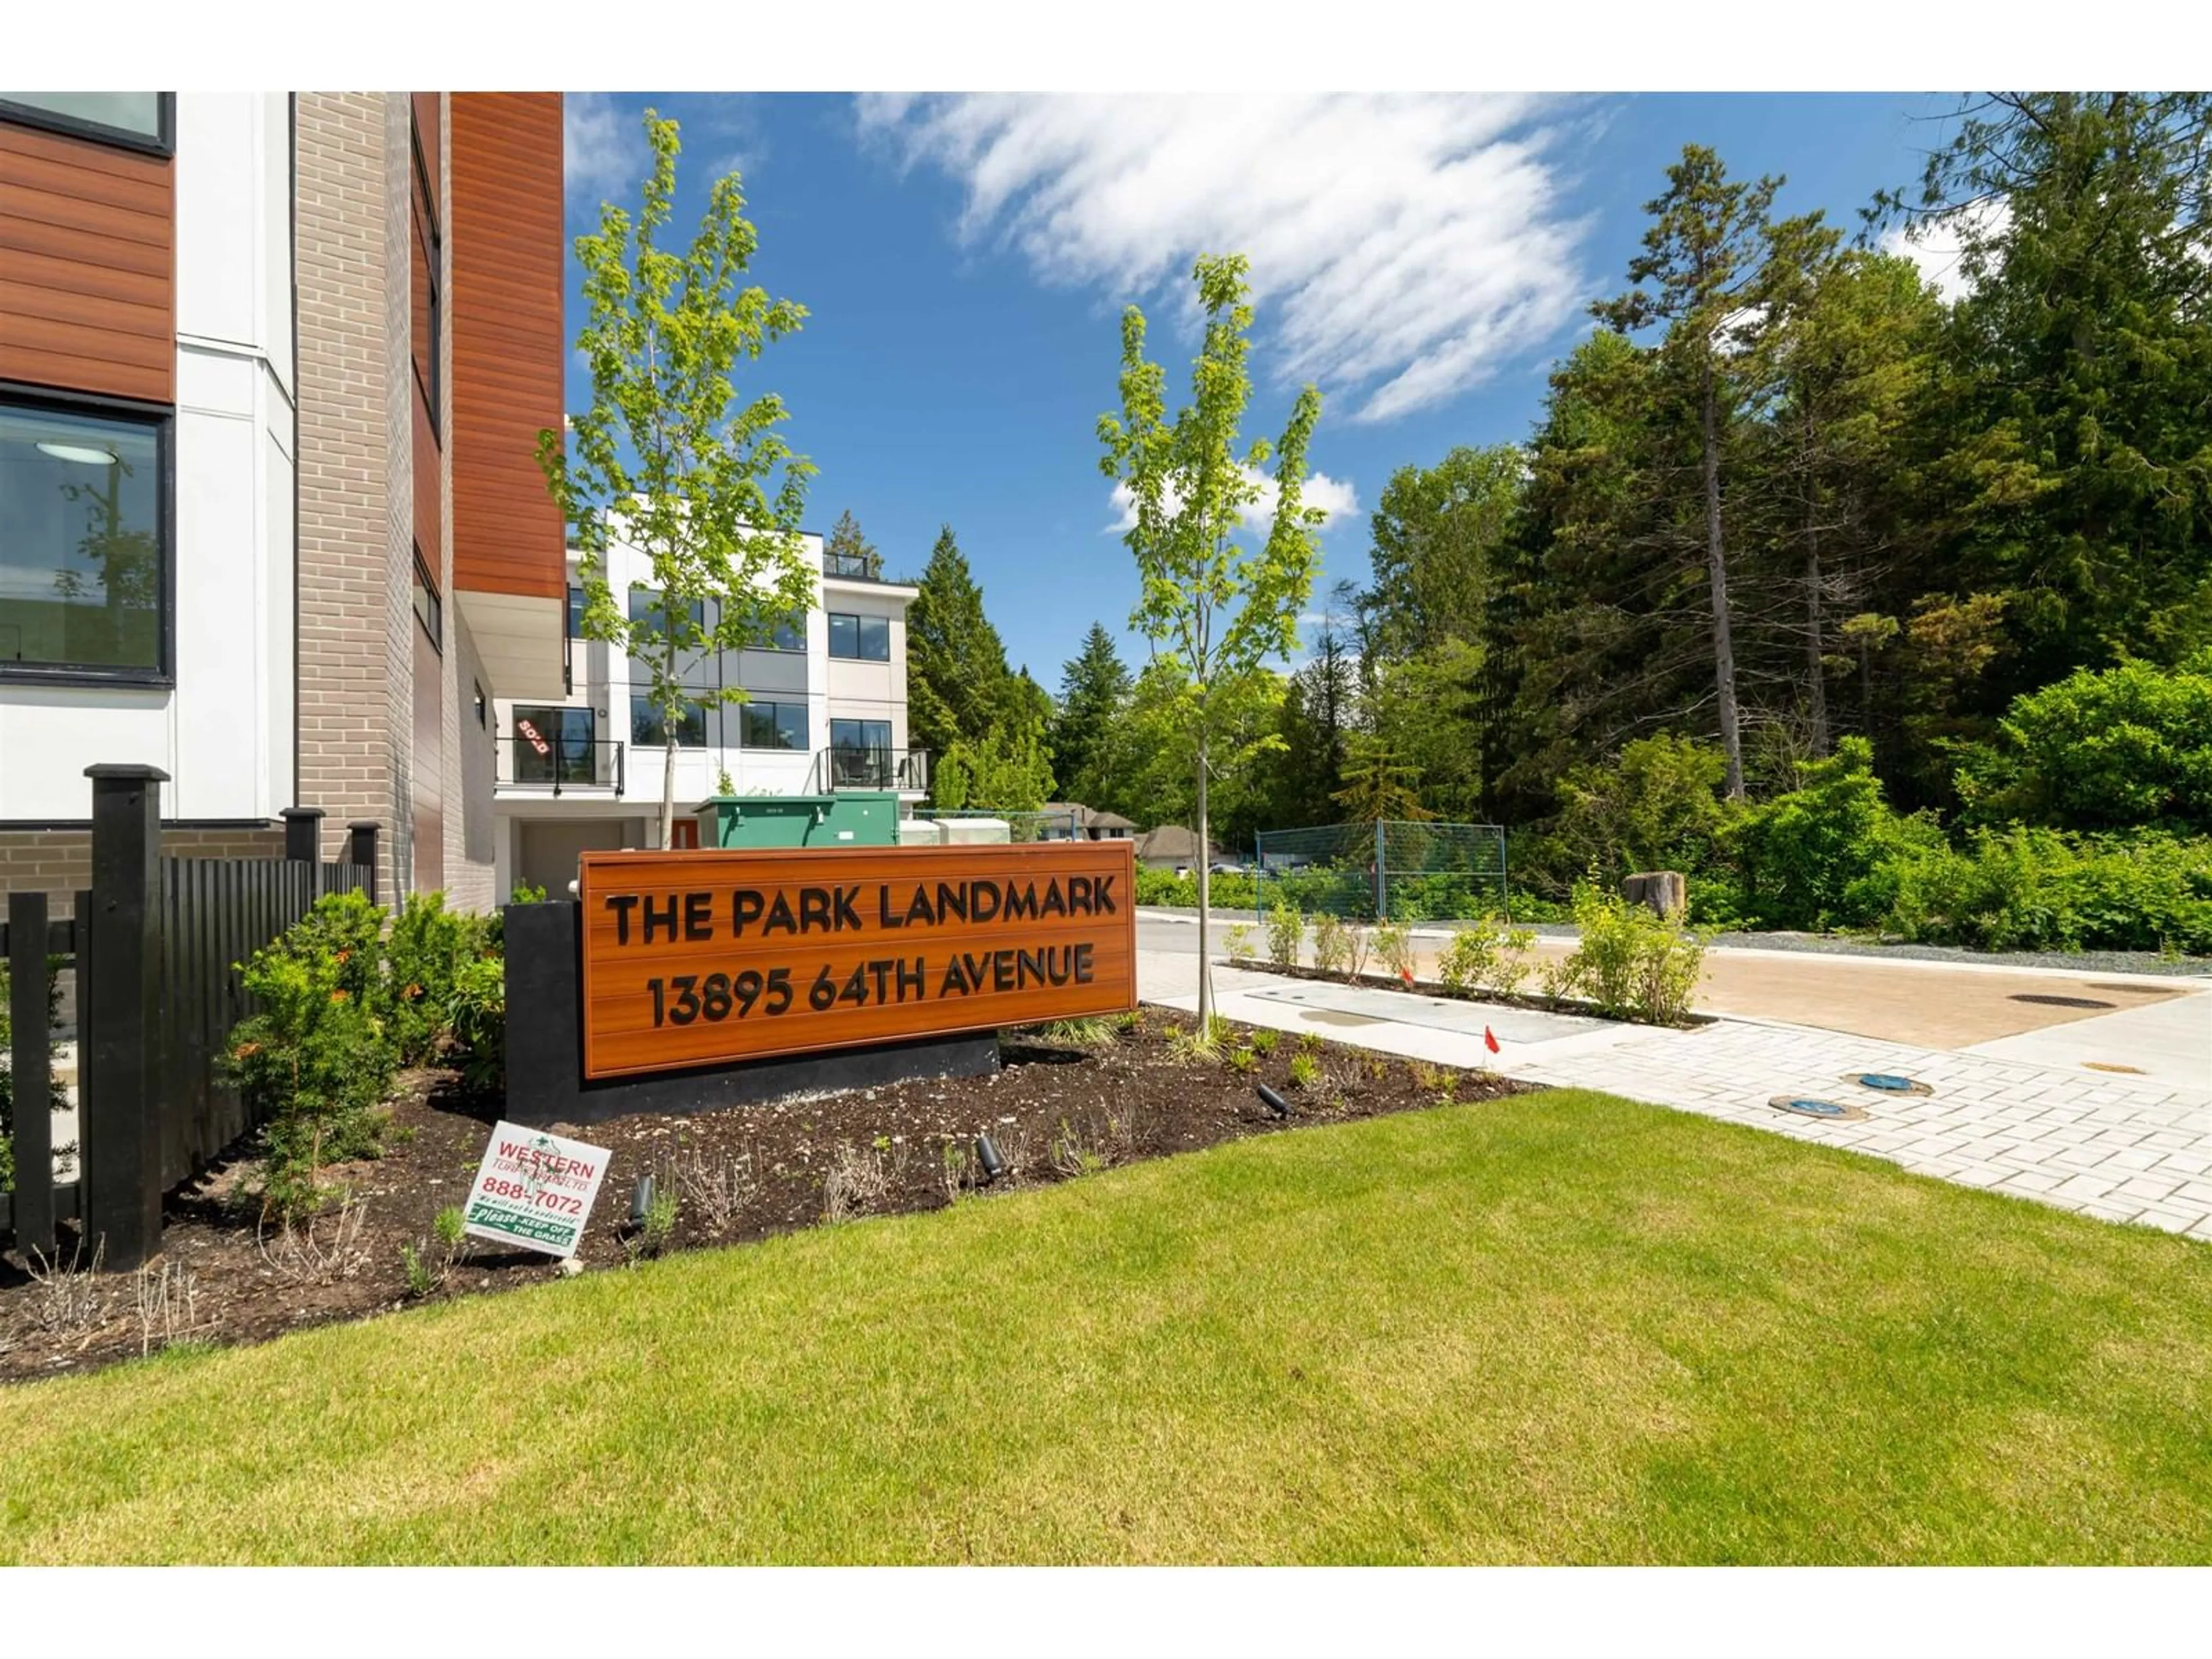 A pic from exterior of the house or condo for 25 13895 64 AVENUE, Surrey British Columbia V3W1Y7